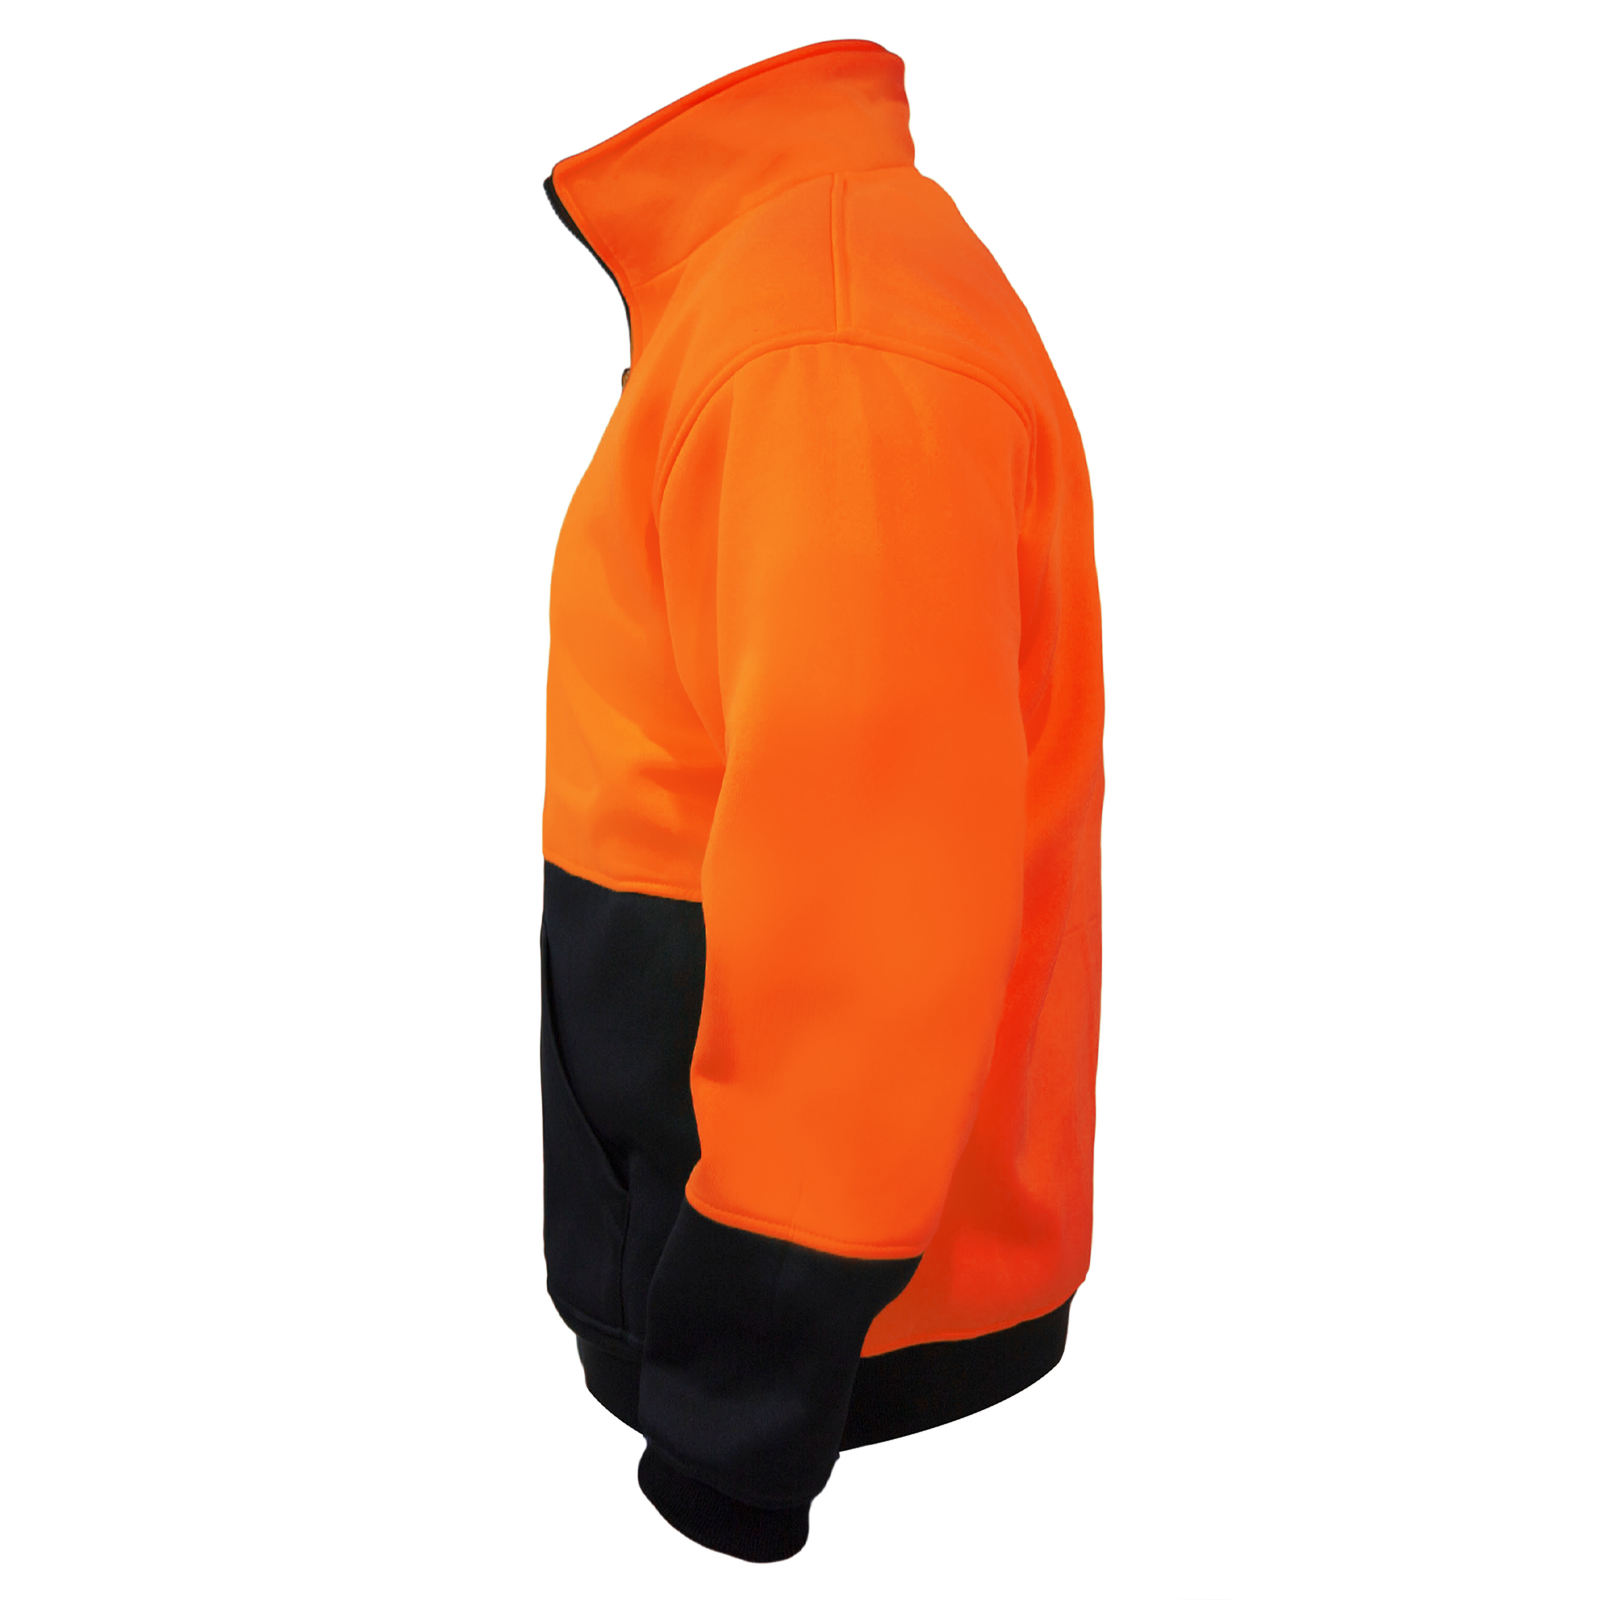 Side view of the hi-vis orange JORESTECH sweatshirt. Sweater has a black stand up collar, half a zipper and a pocket chest that closes with a black zipper.